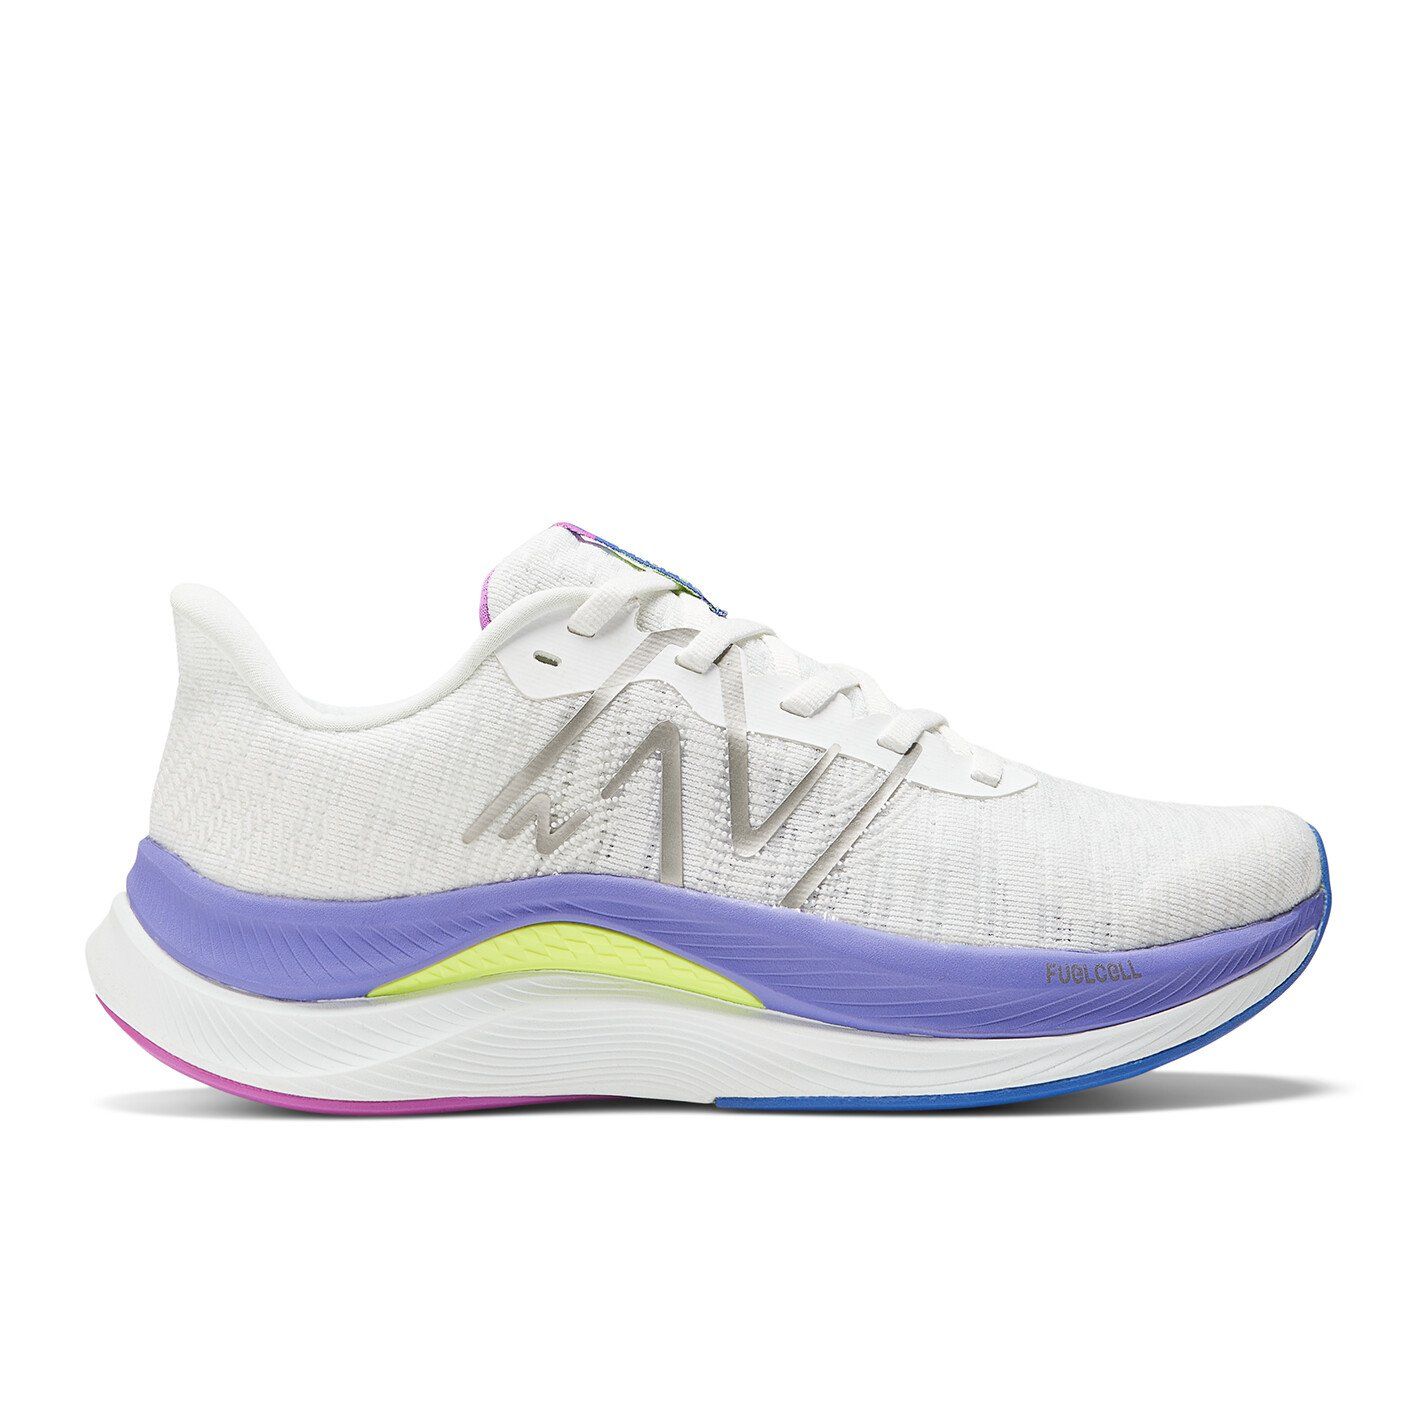 New Balance - WFCPRCW4 Fuel Cell Propel v4